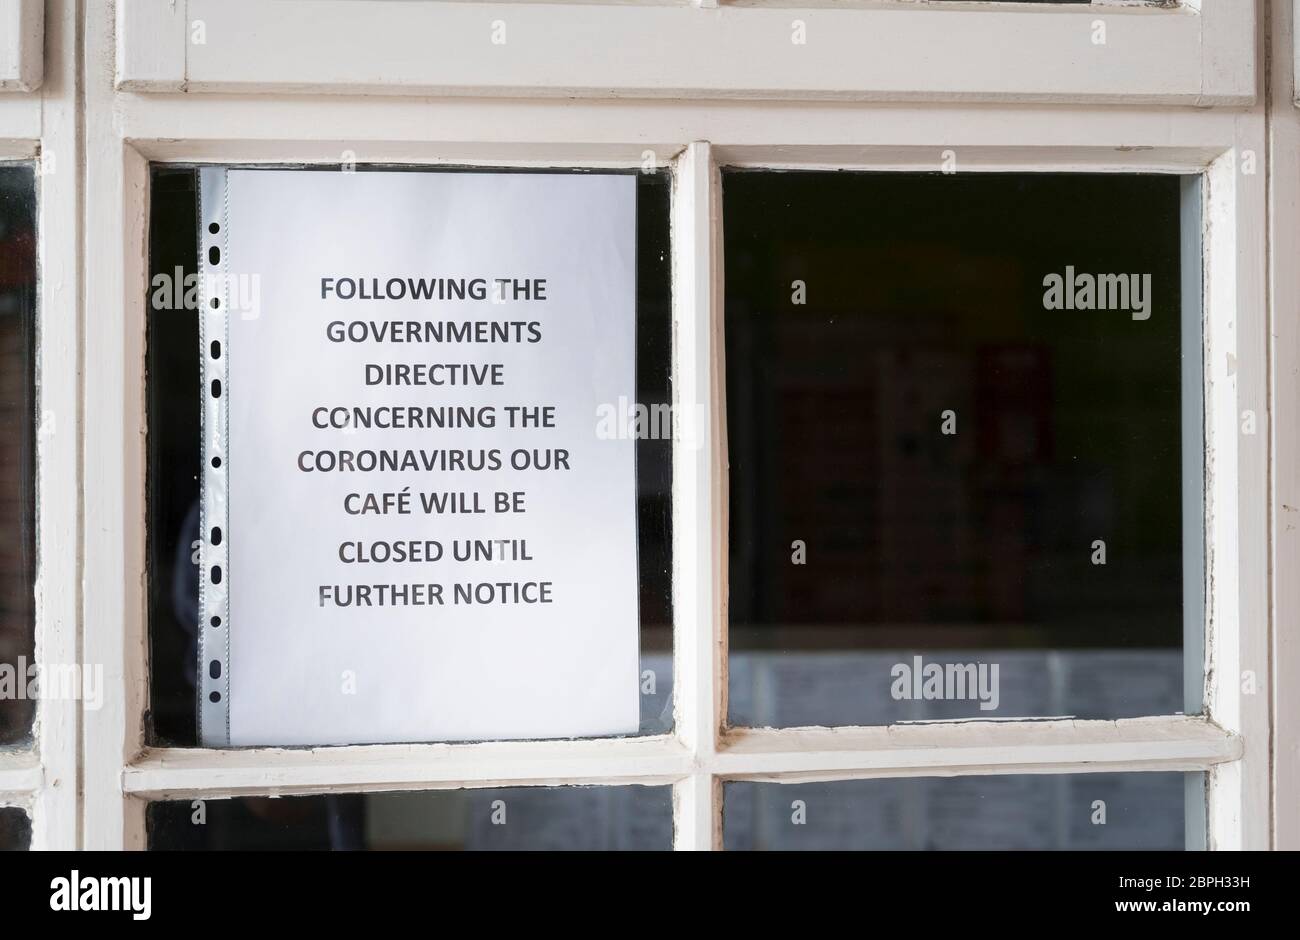 Customer notice in a cafe window during the Covid-19 pandemic,  Market Harborough, Leicestershire, England. Stock Photo